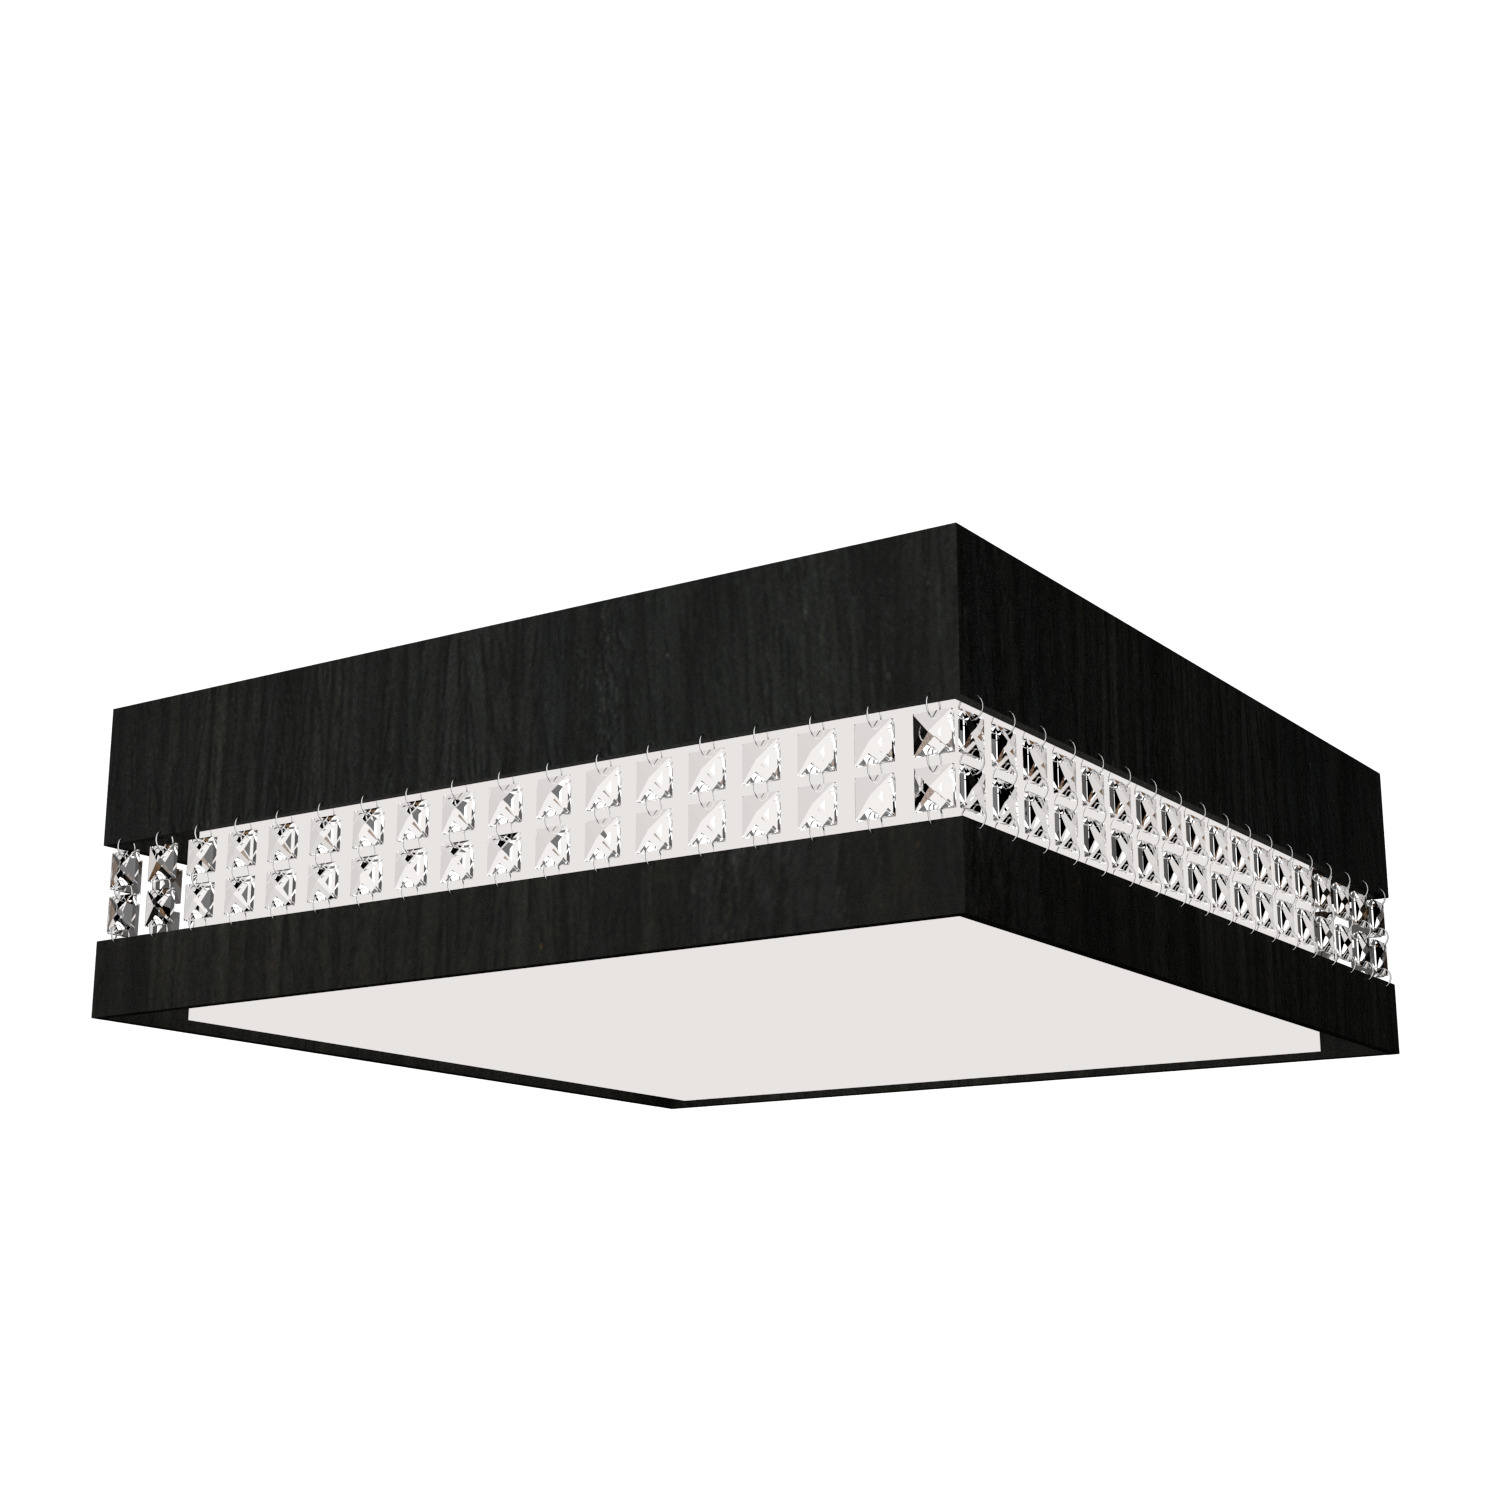 Ceiling Lamp Accord Cristais 5046 - Cristais Line Accord Lighting | 44. Charcoal